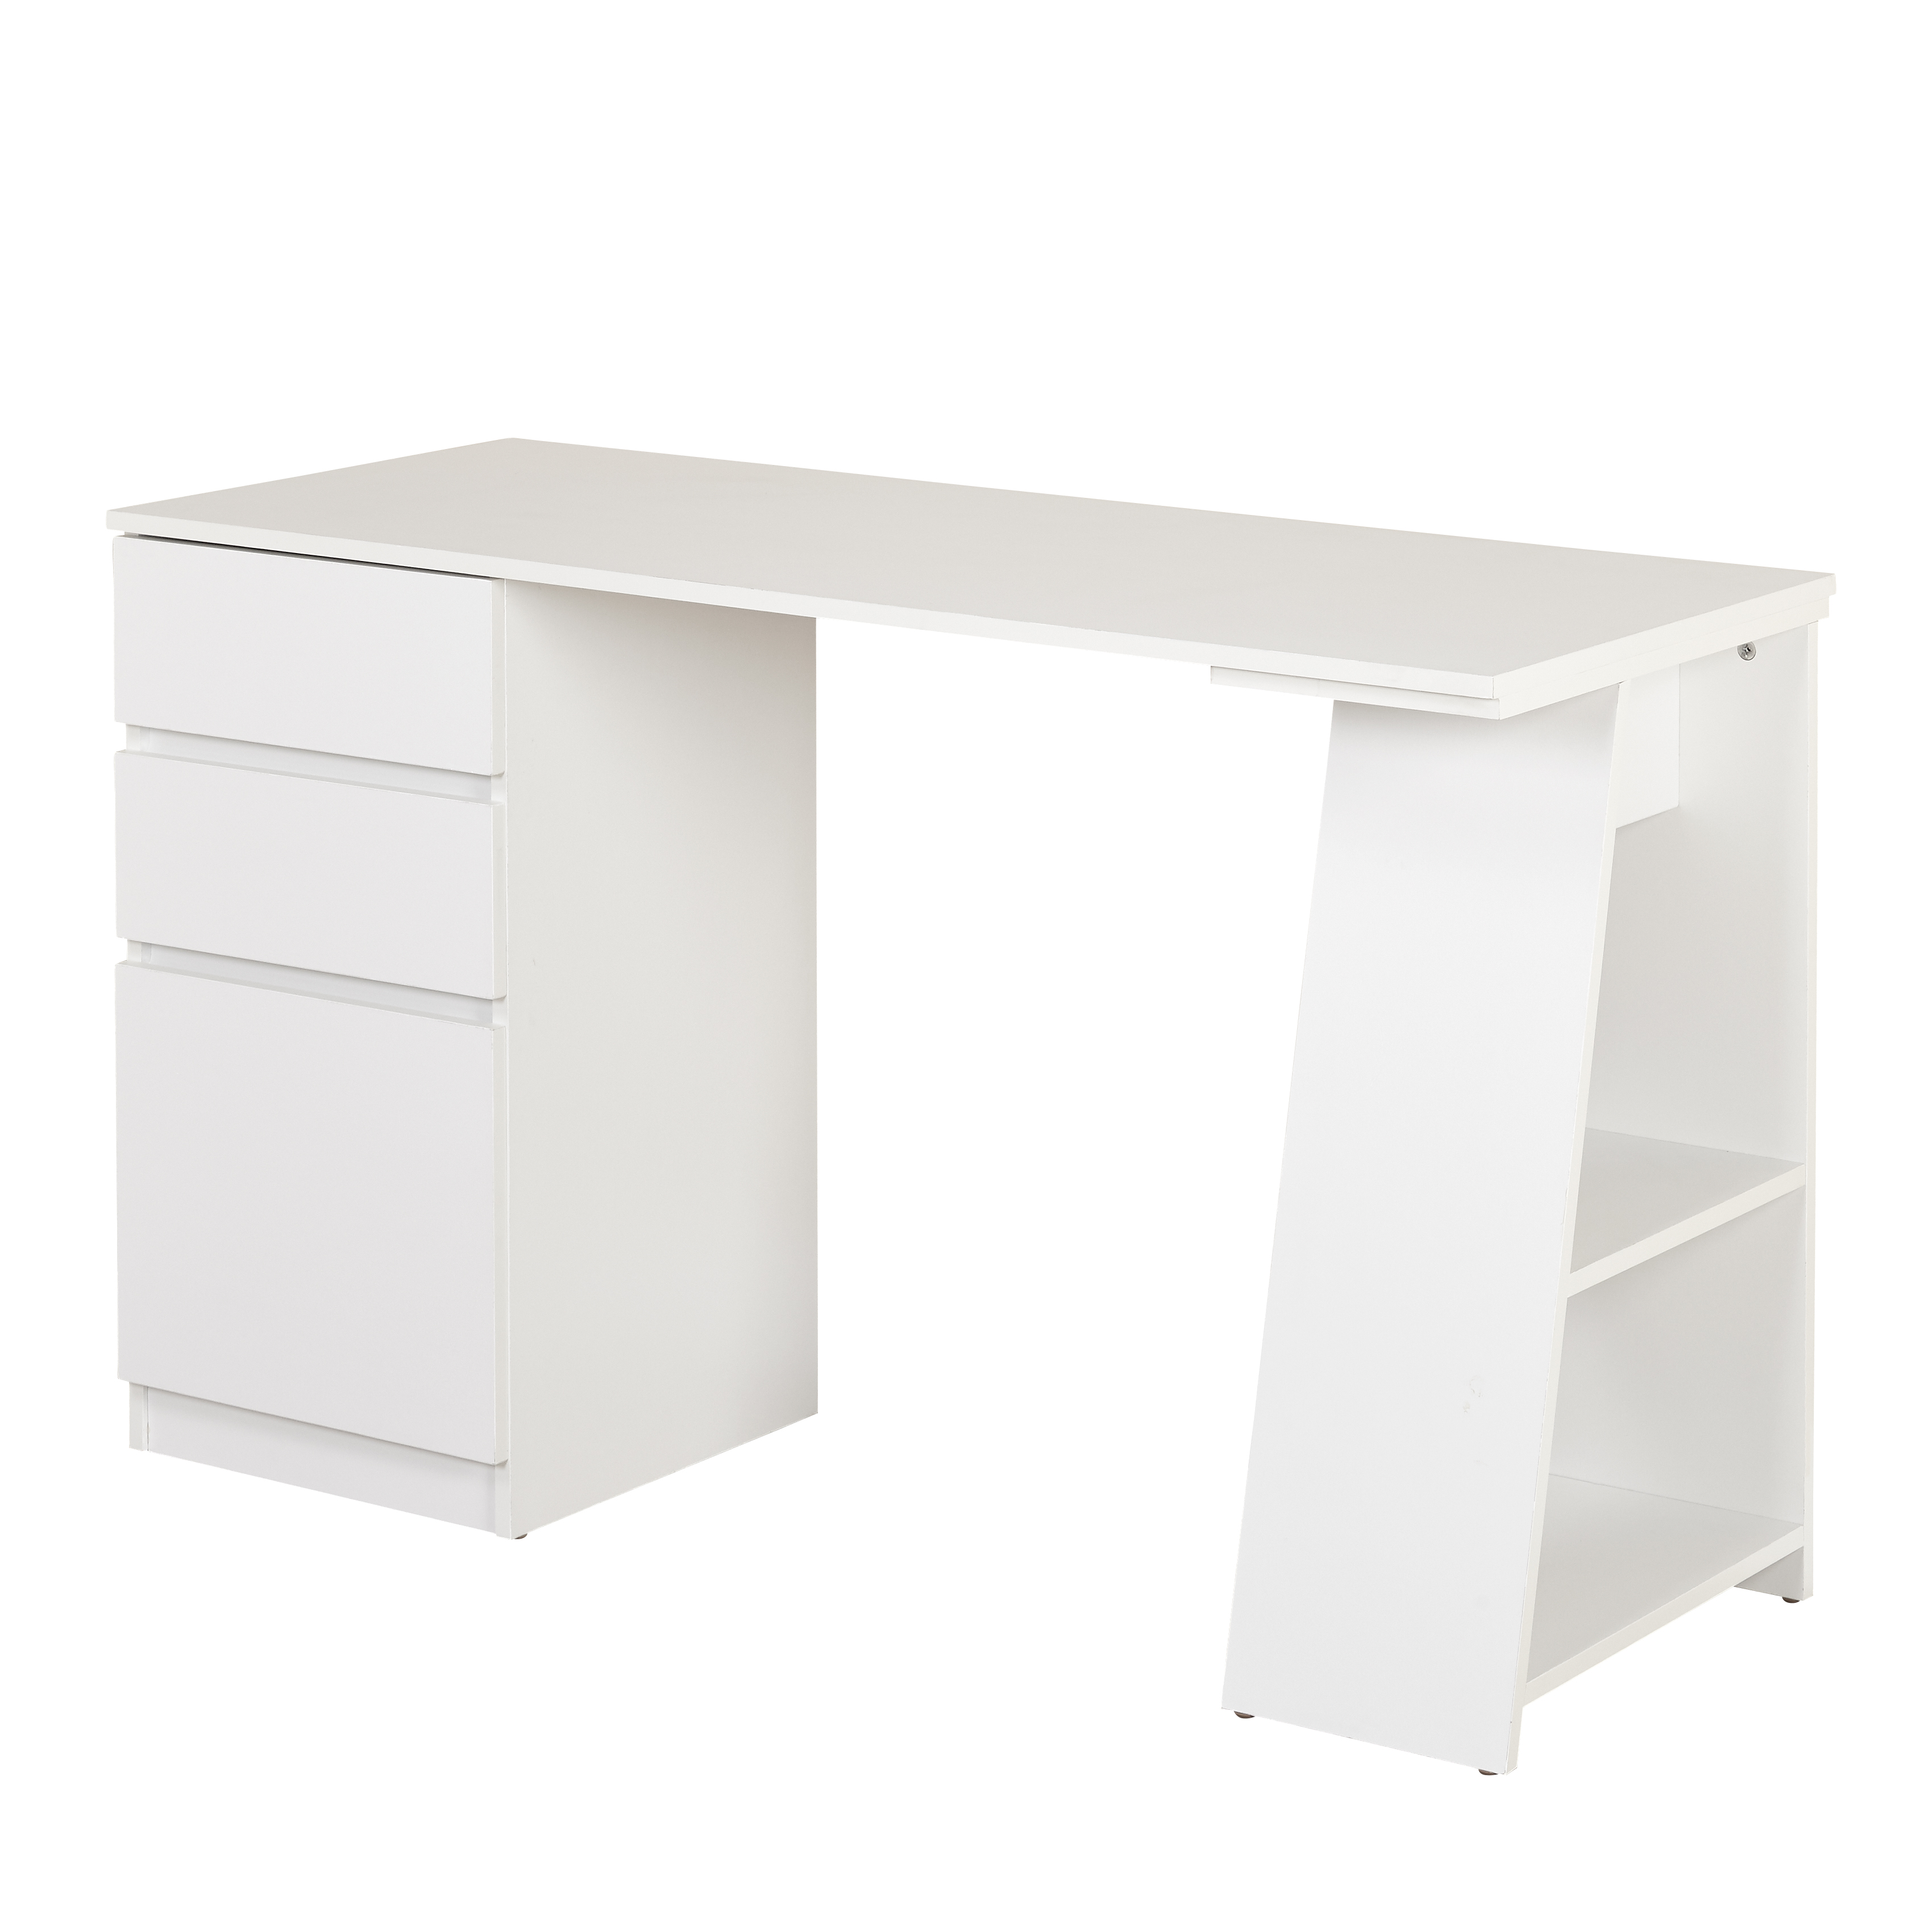 Como Writing Desk with 3 Storage Drawers, White - image 3 of 4